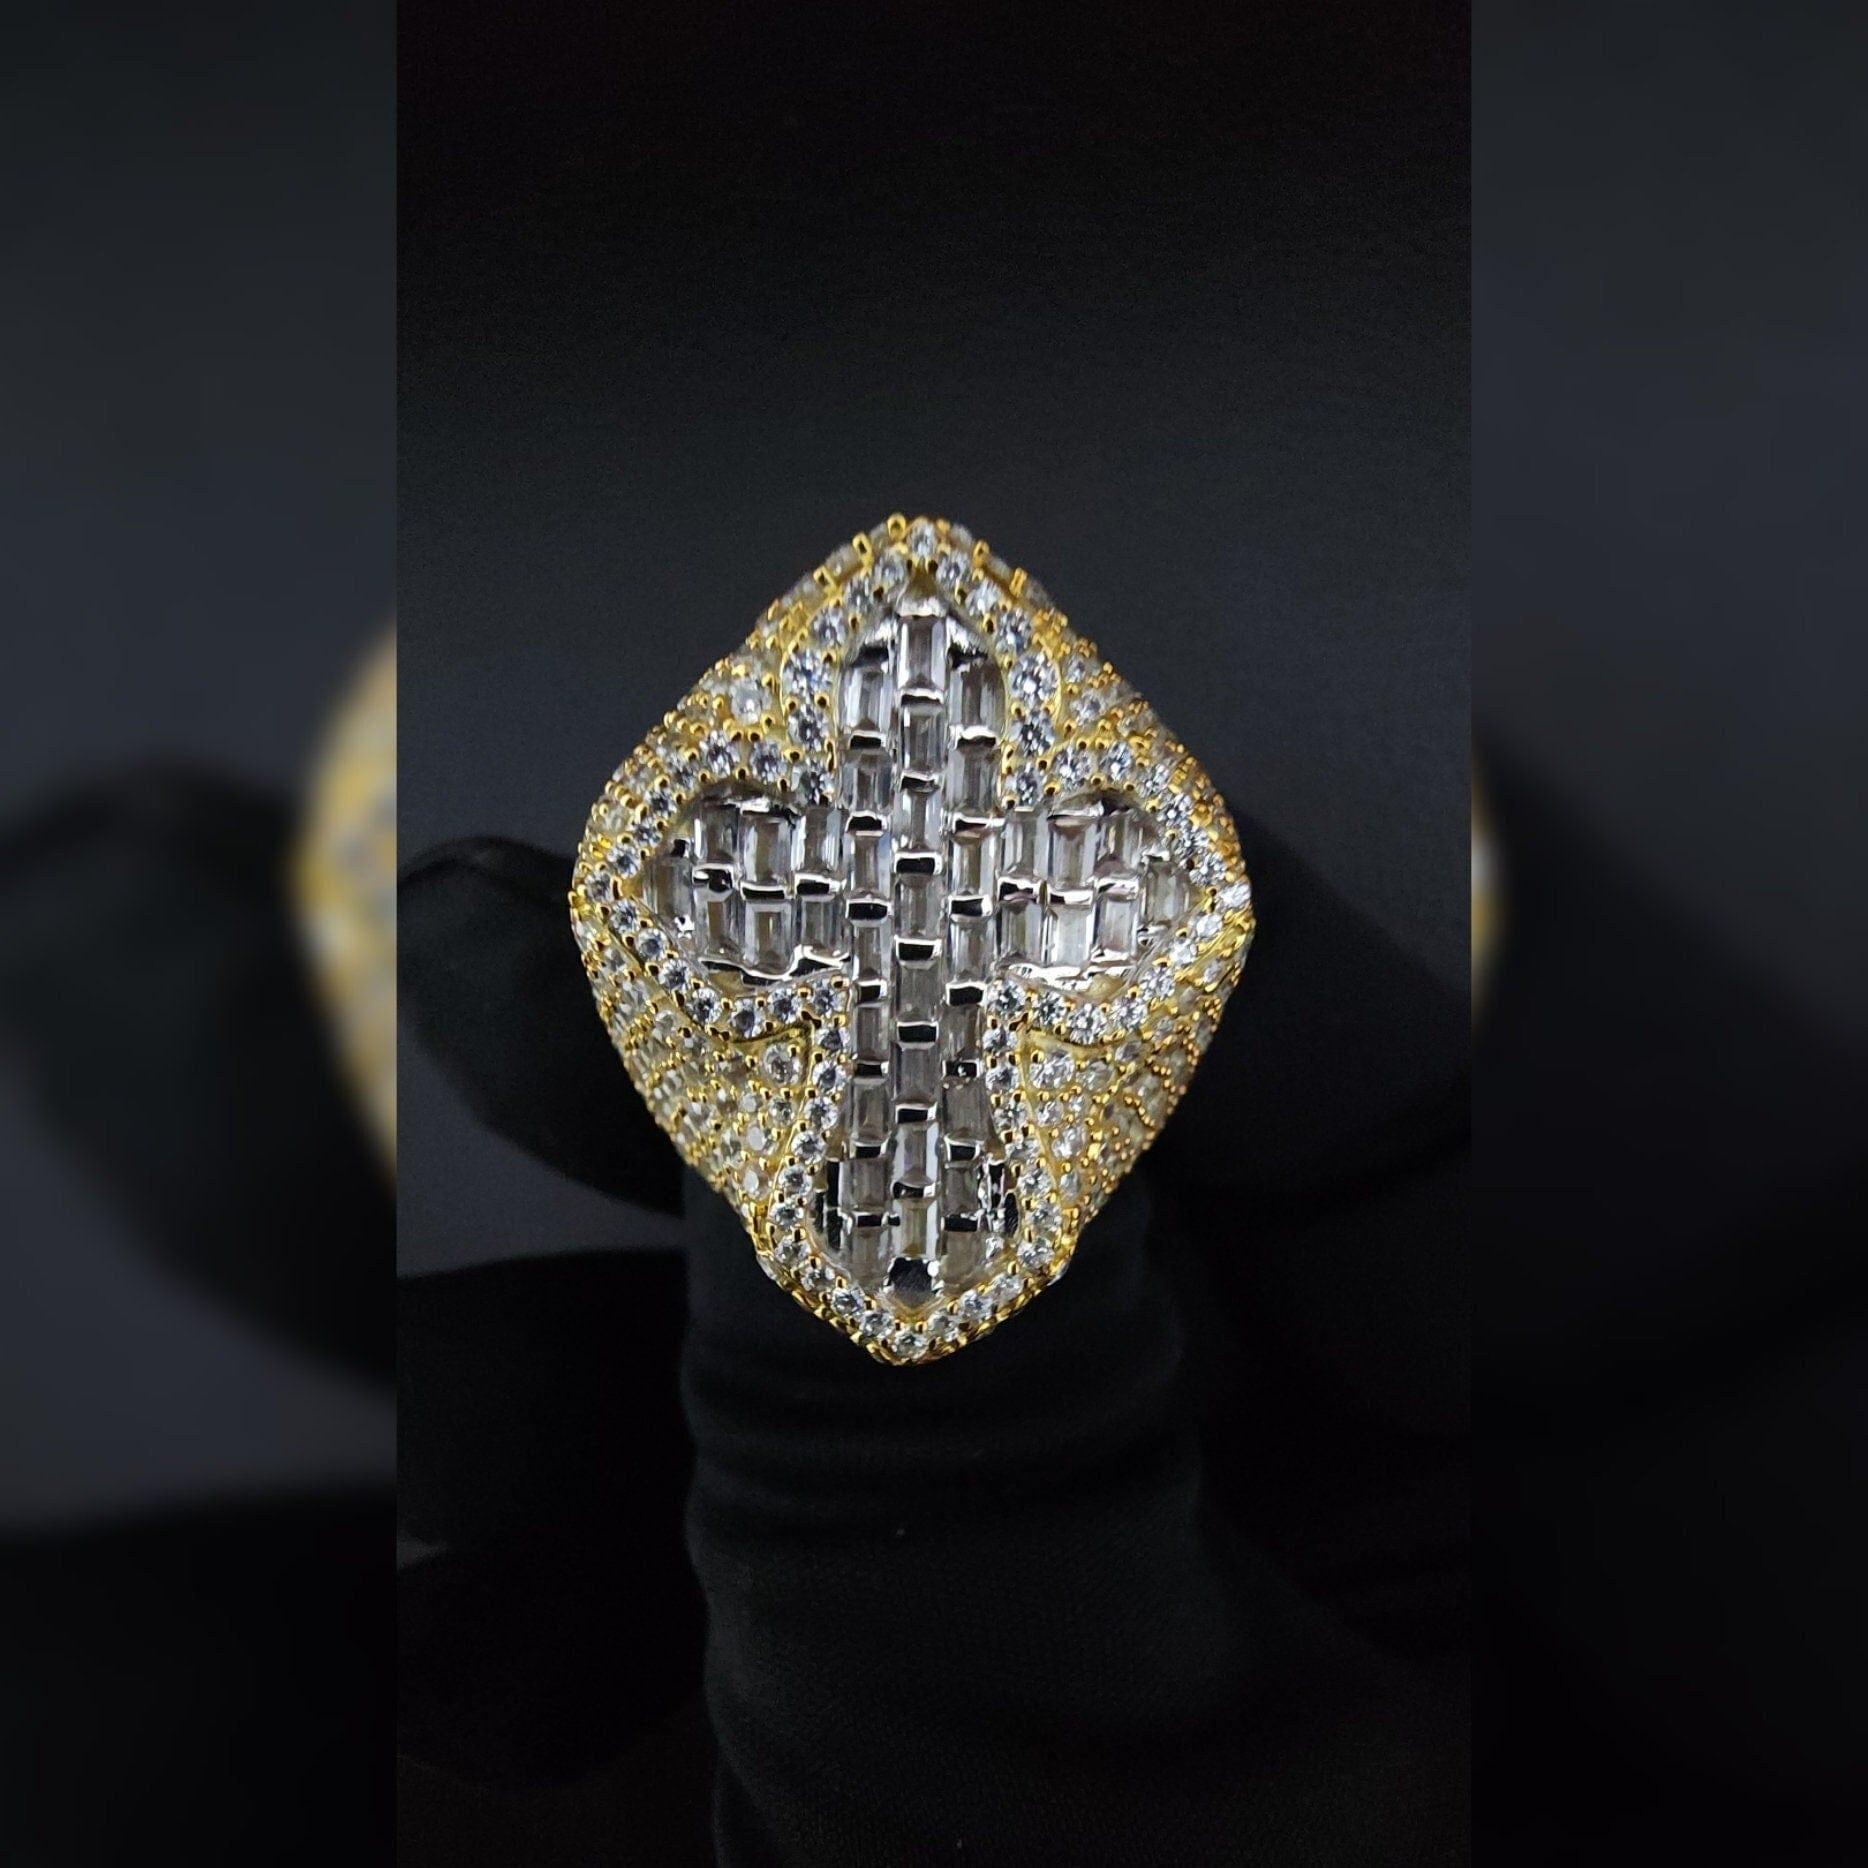 Cross Made in 925 Silver Studded with VVS Colorless Moissanite Stone Hiphop Ring - JBR Jeweler